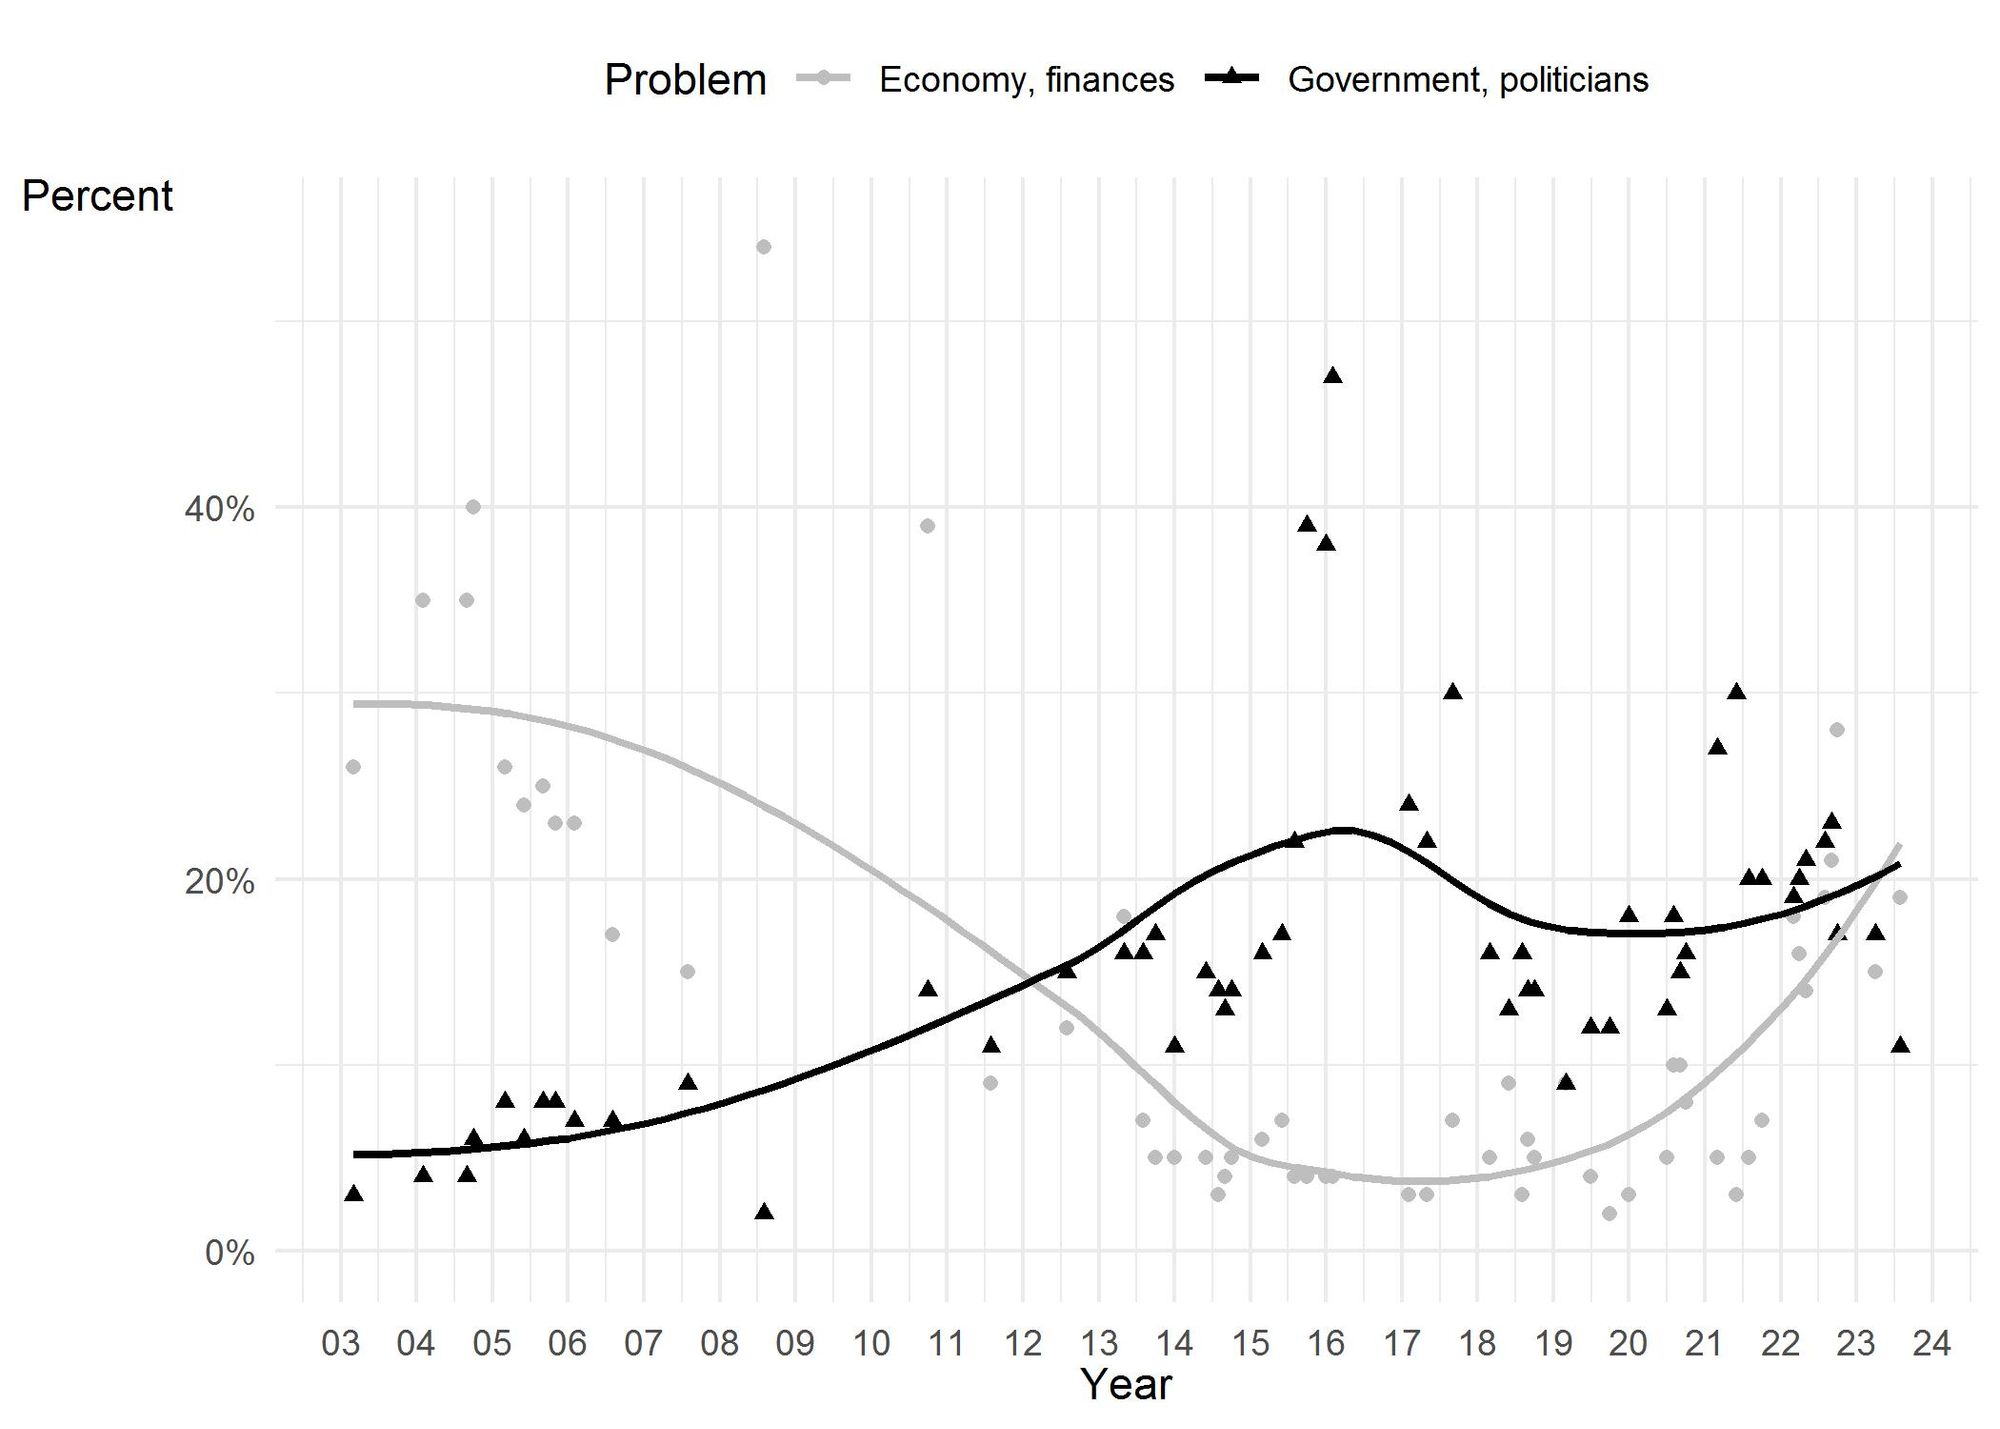 Figure 1. Line graph showing F&M Poll data trends in registered voters' mentions of the economy or government as the most important problem facing Pennsylvania, 2003 to 2004.